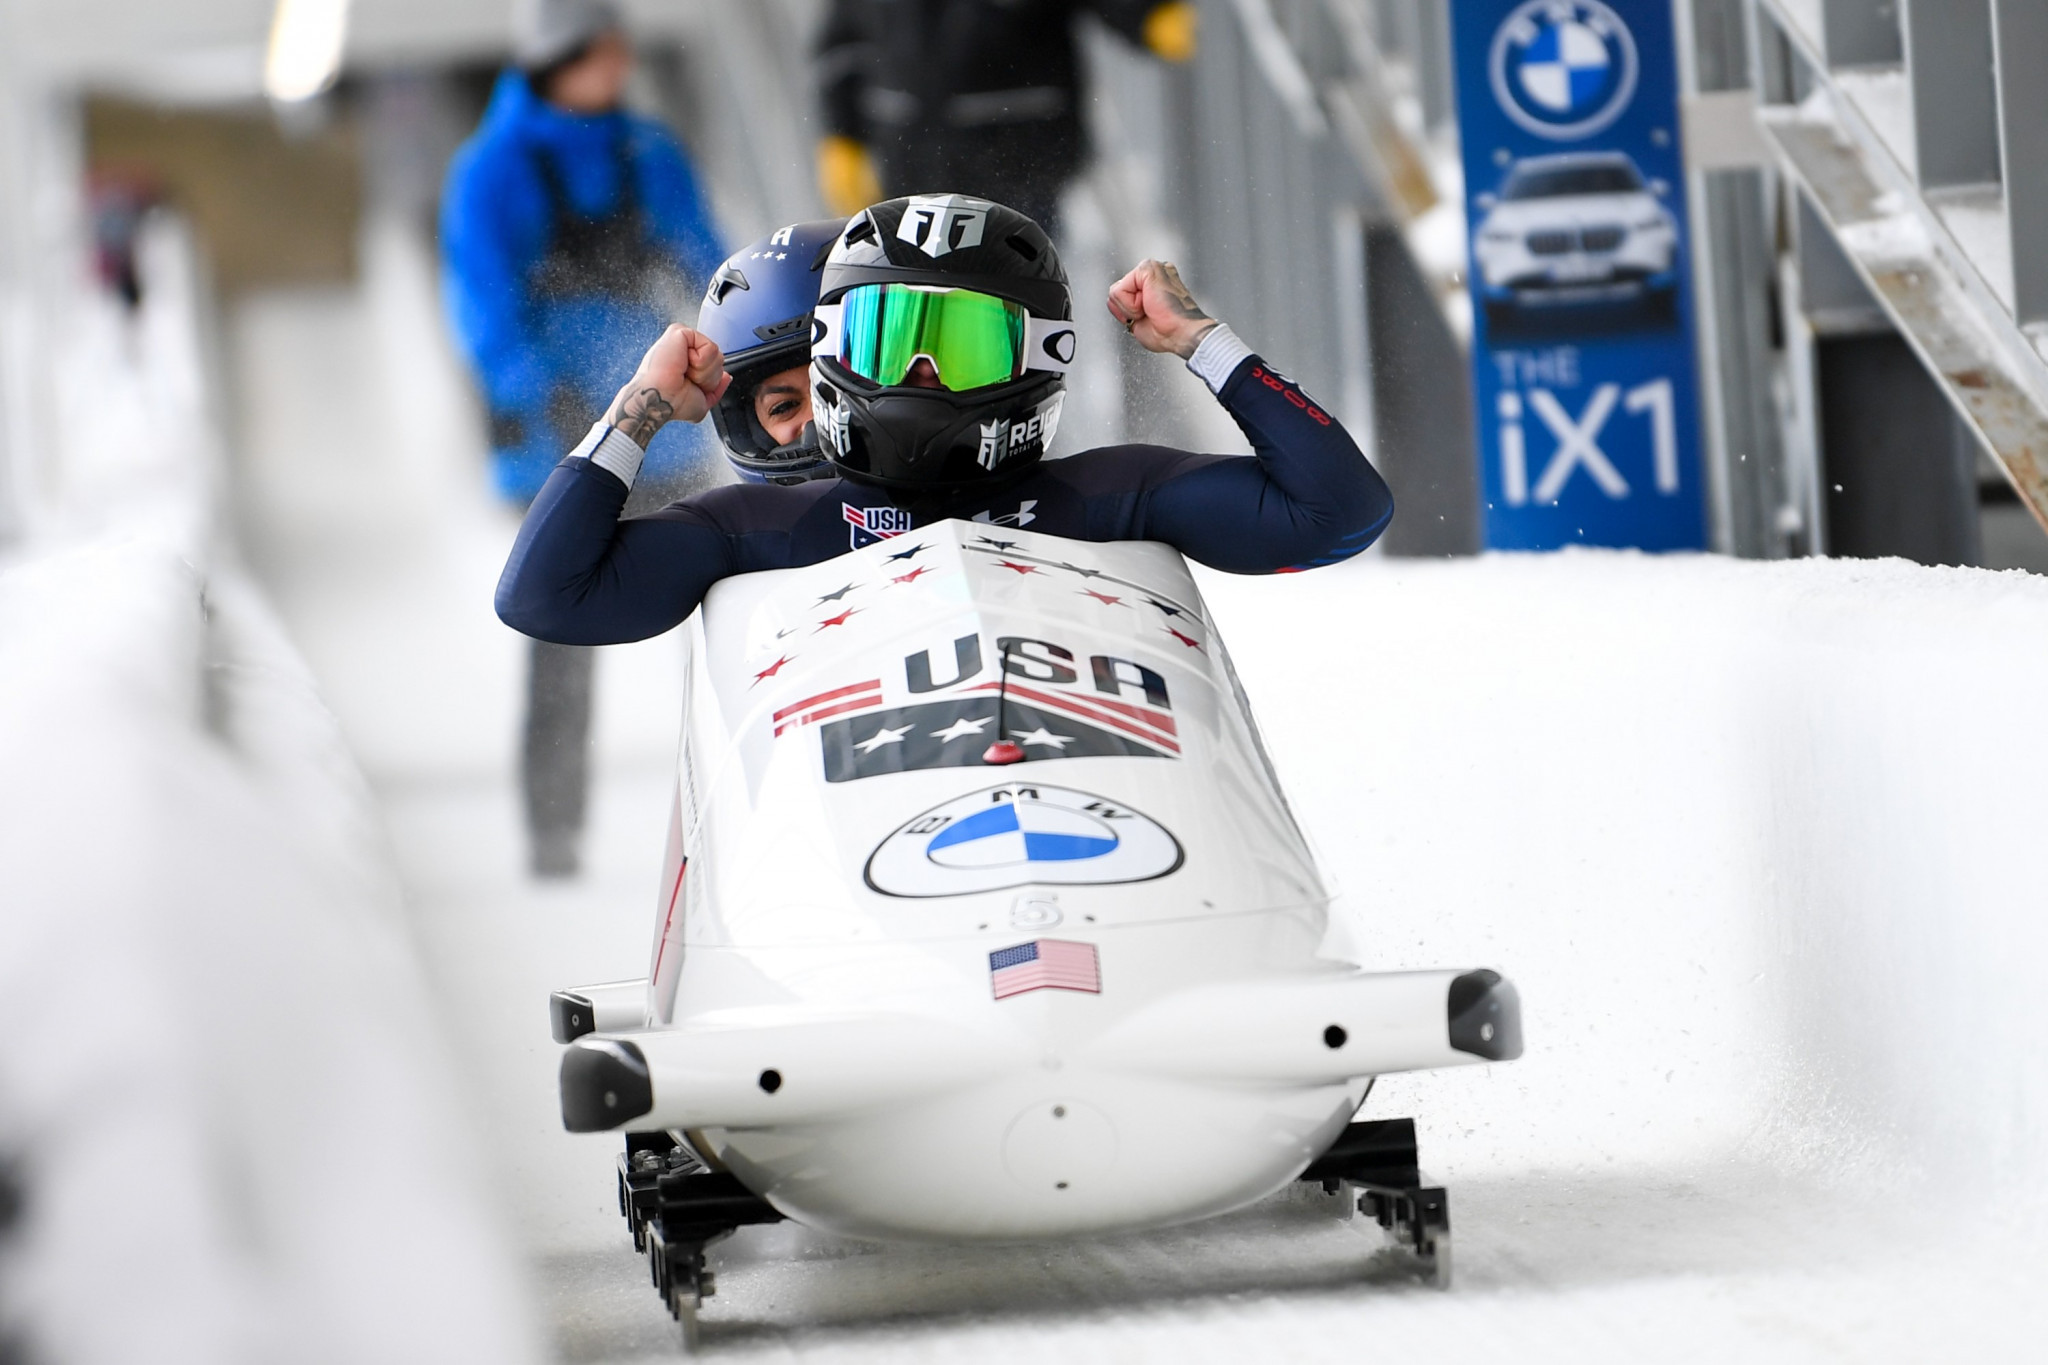 Kaillie Humphries of the United States bagged her first IBSF World Cup victory of the season in Lake Placid ©IBSF